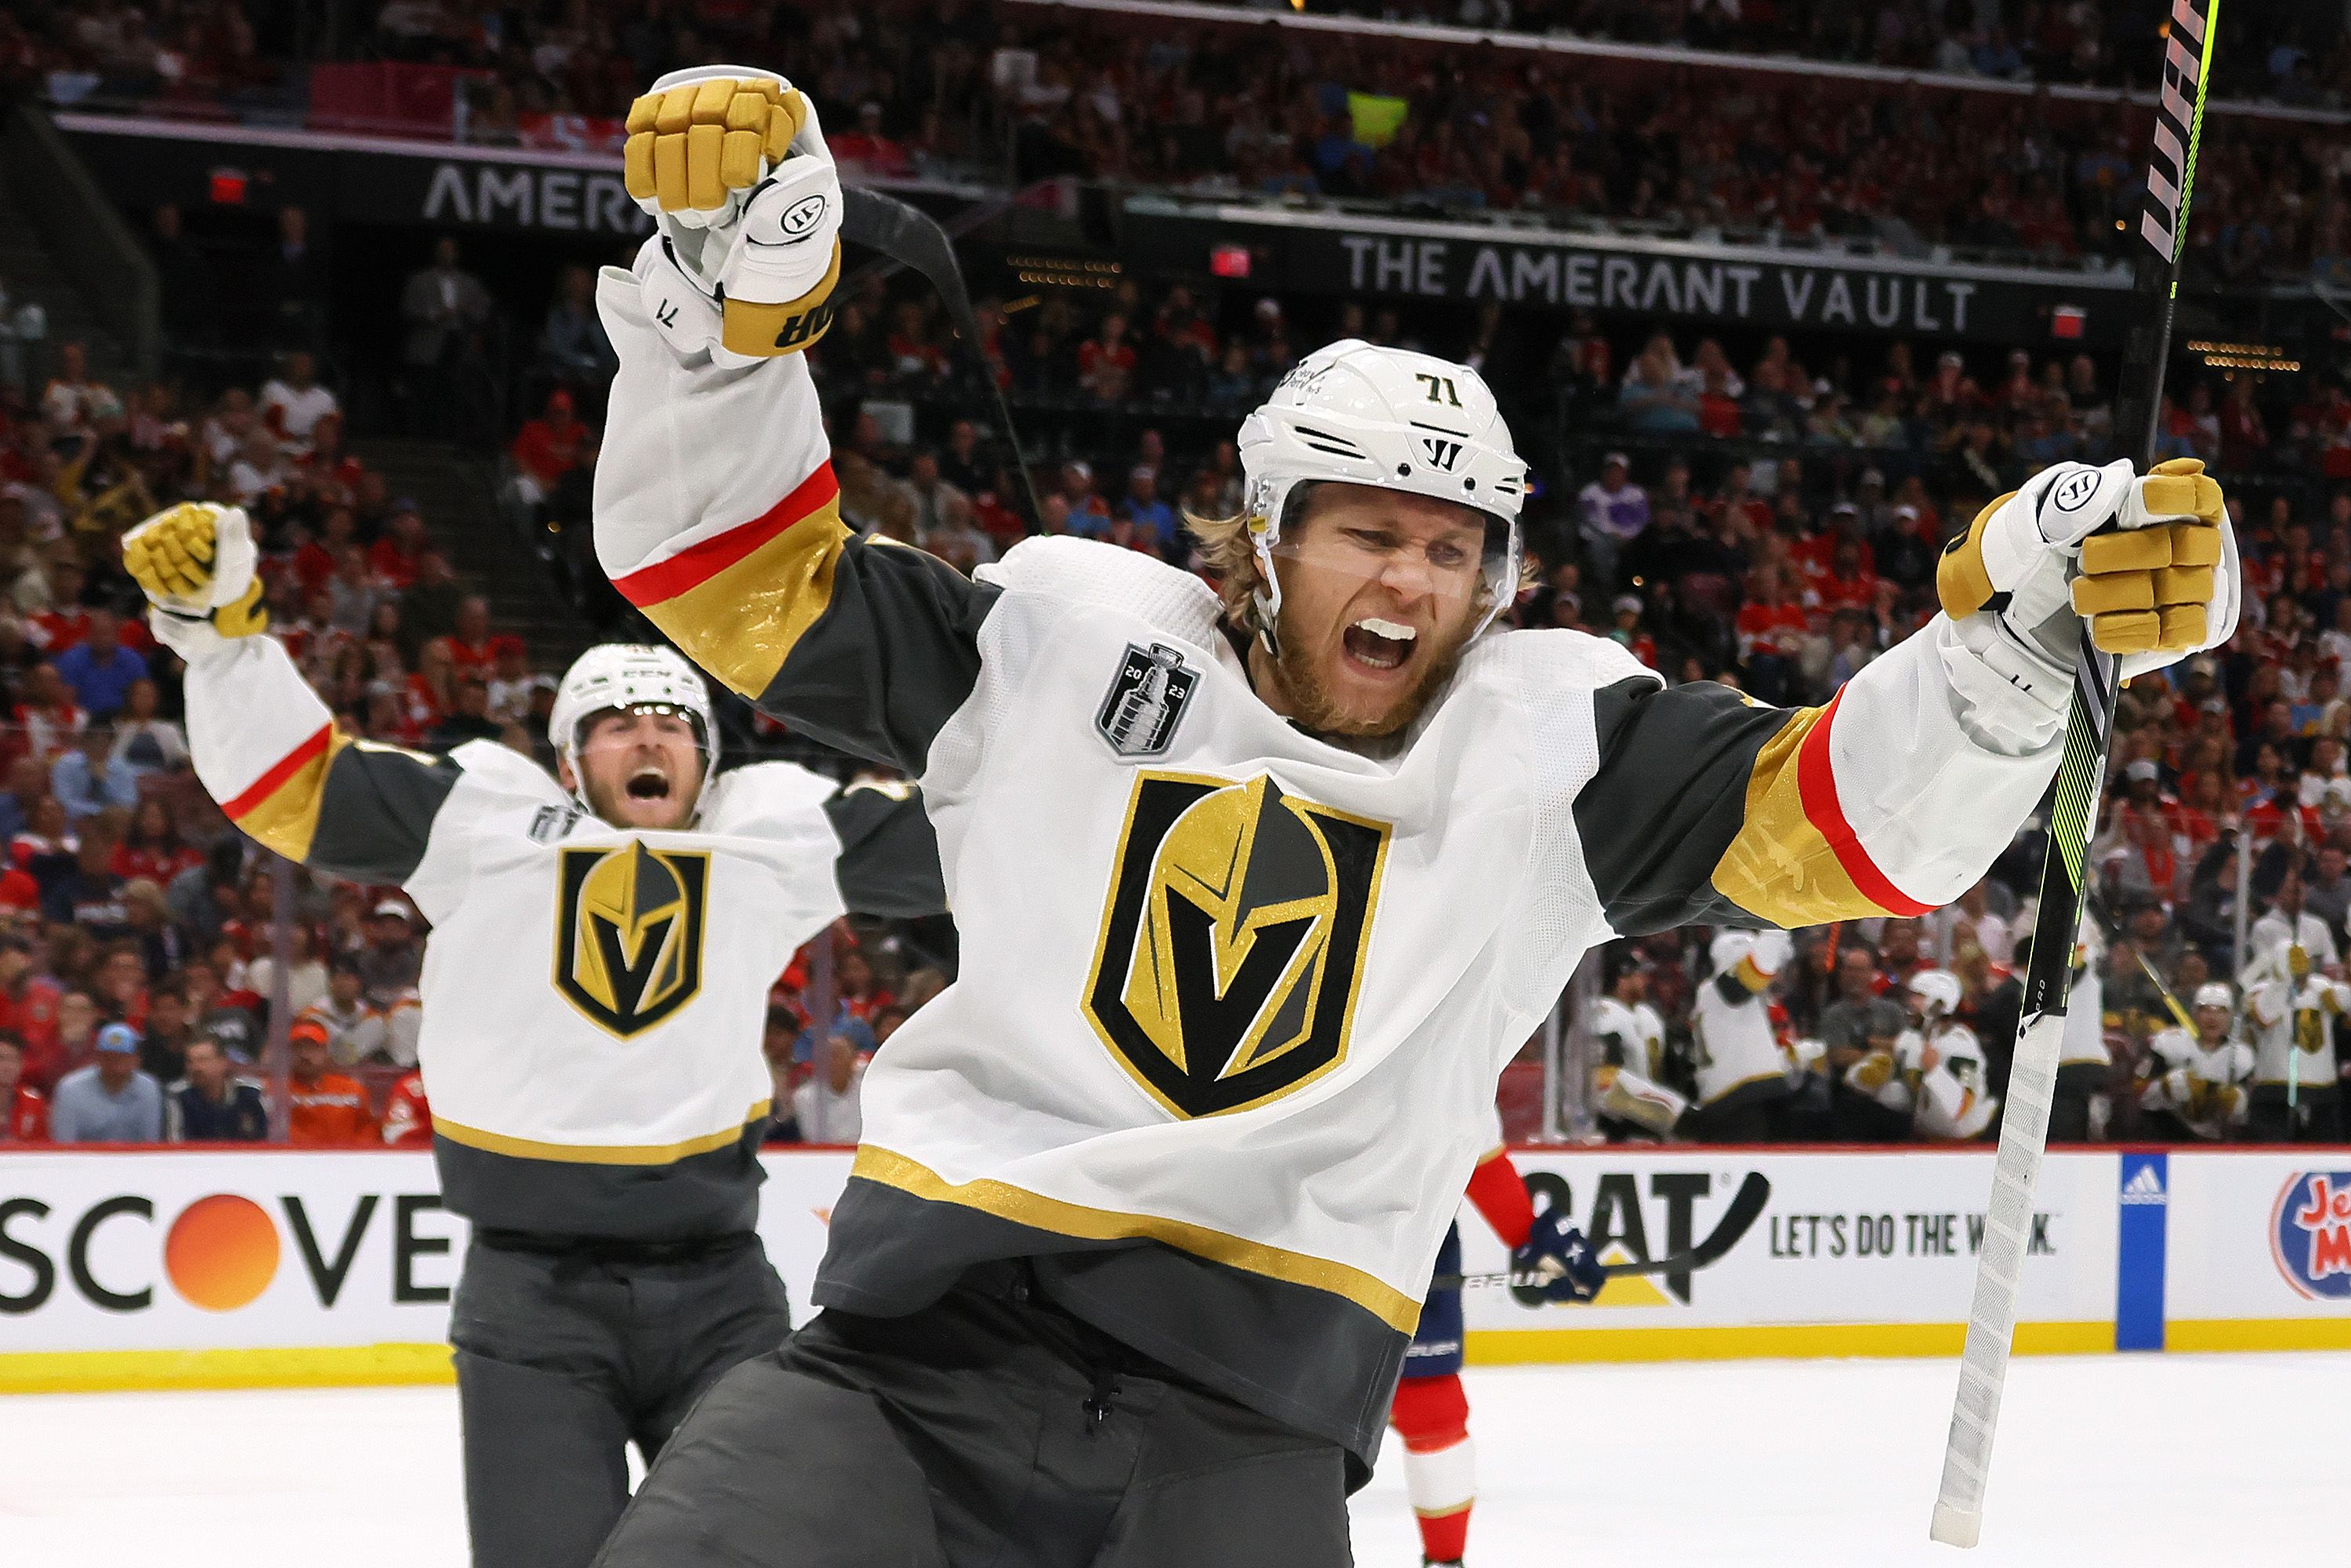 Las Vegas valley reacts as Golden Knights win Stanley Cup